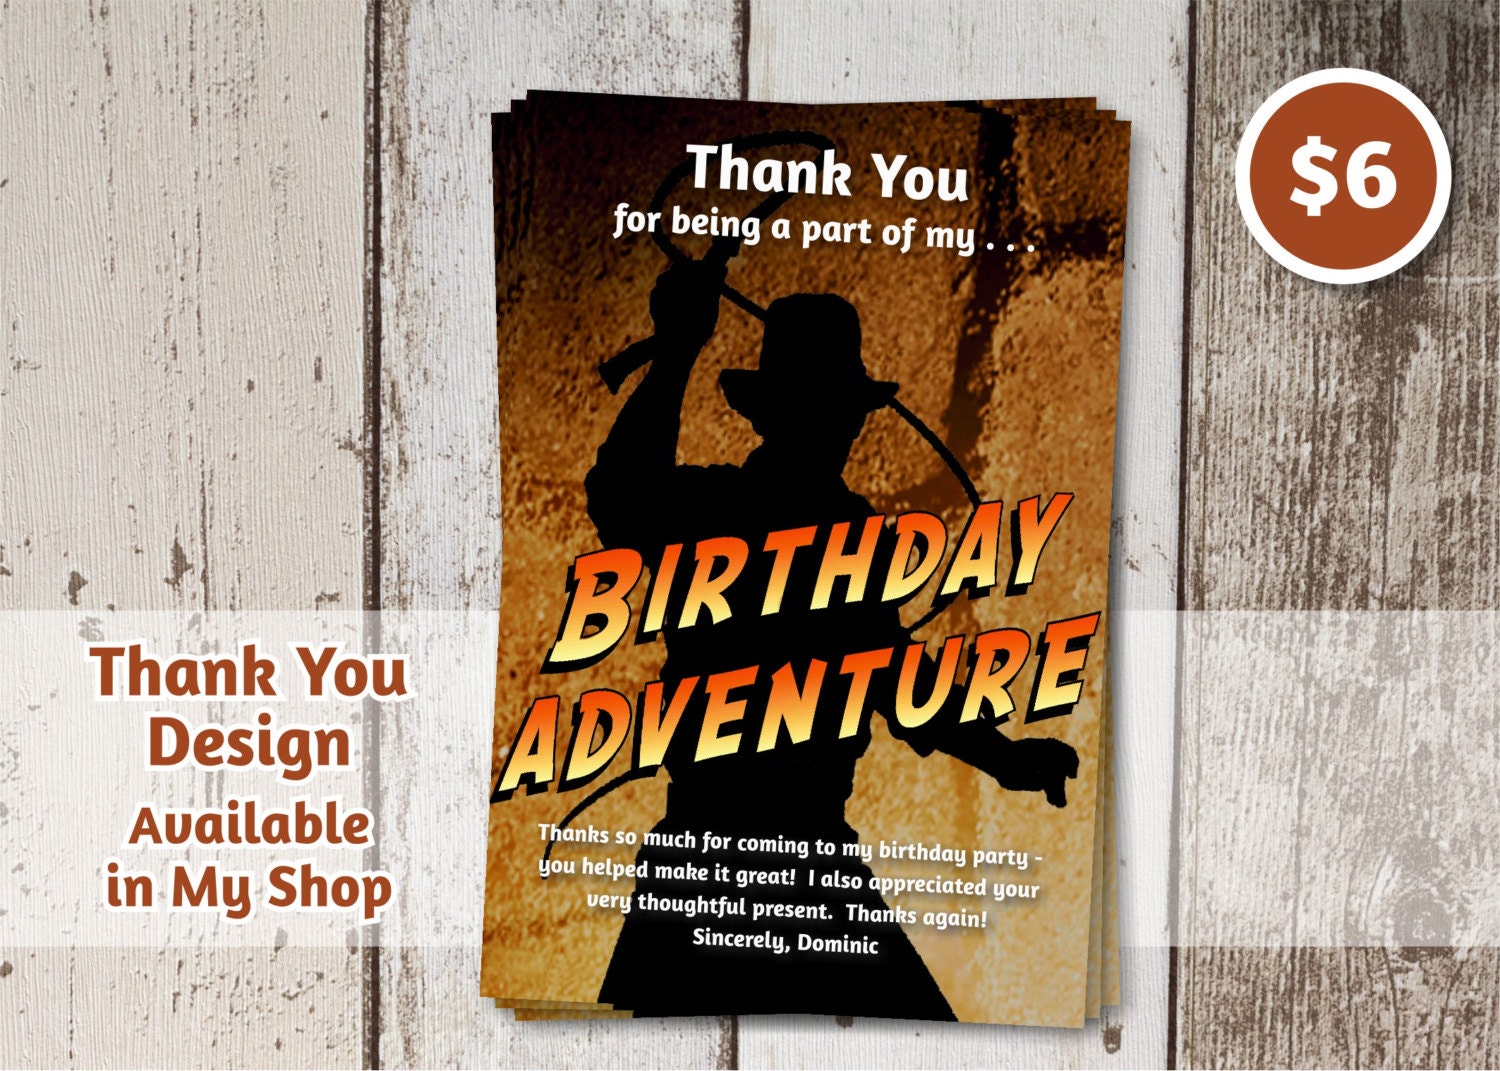 Invitation for Indiana Jones Themed Birthday Party - Instant file